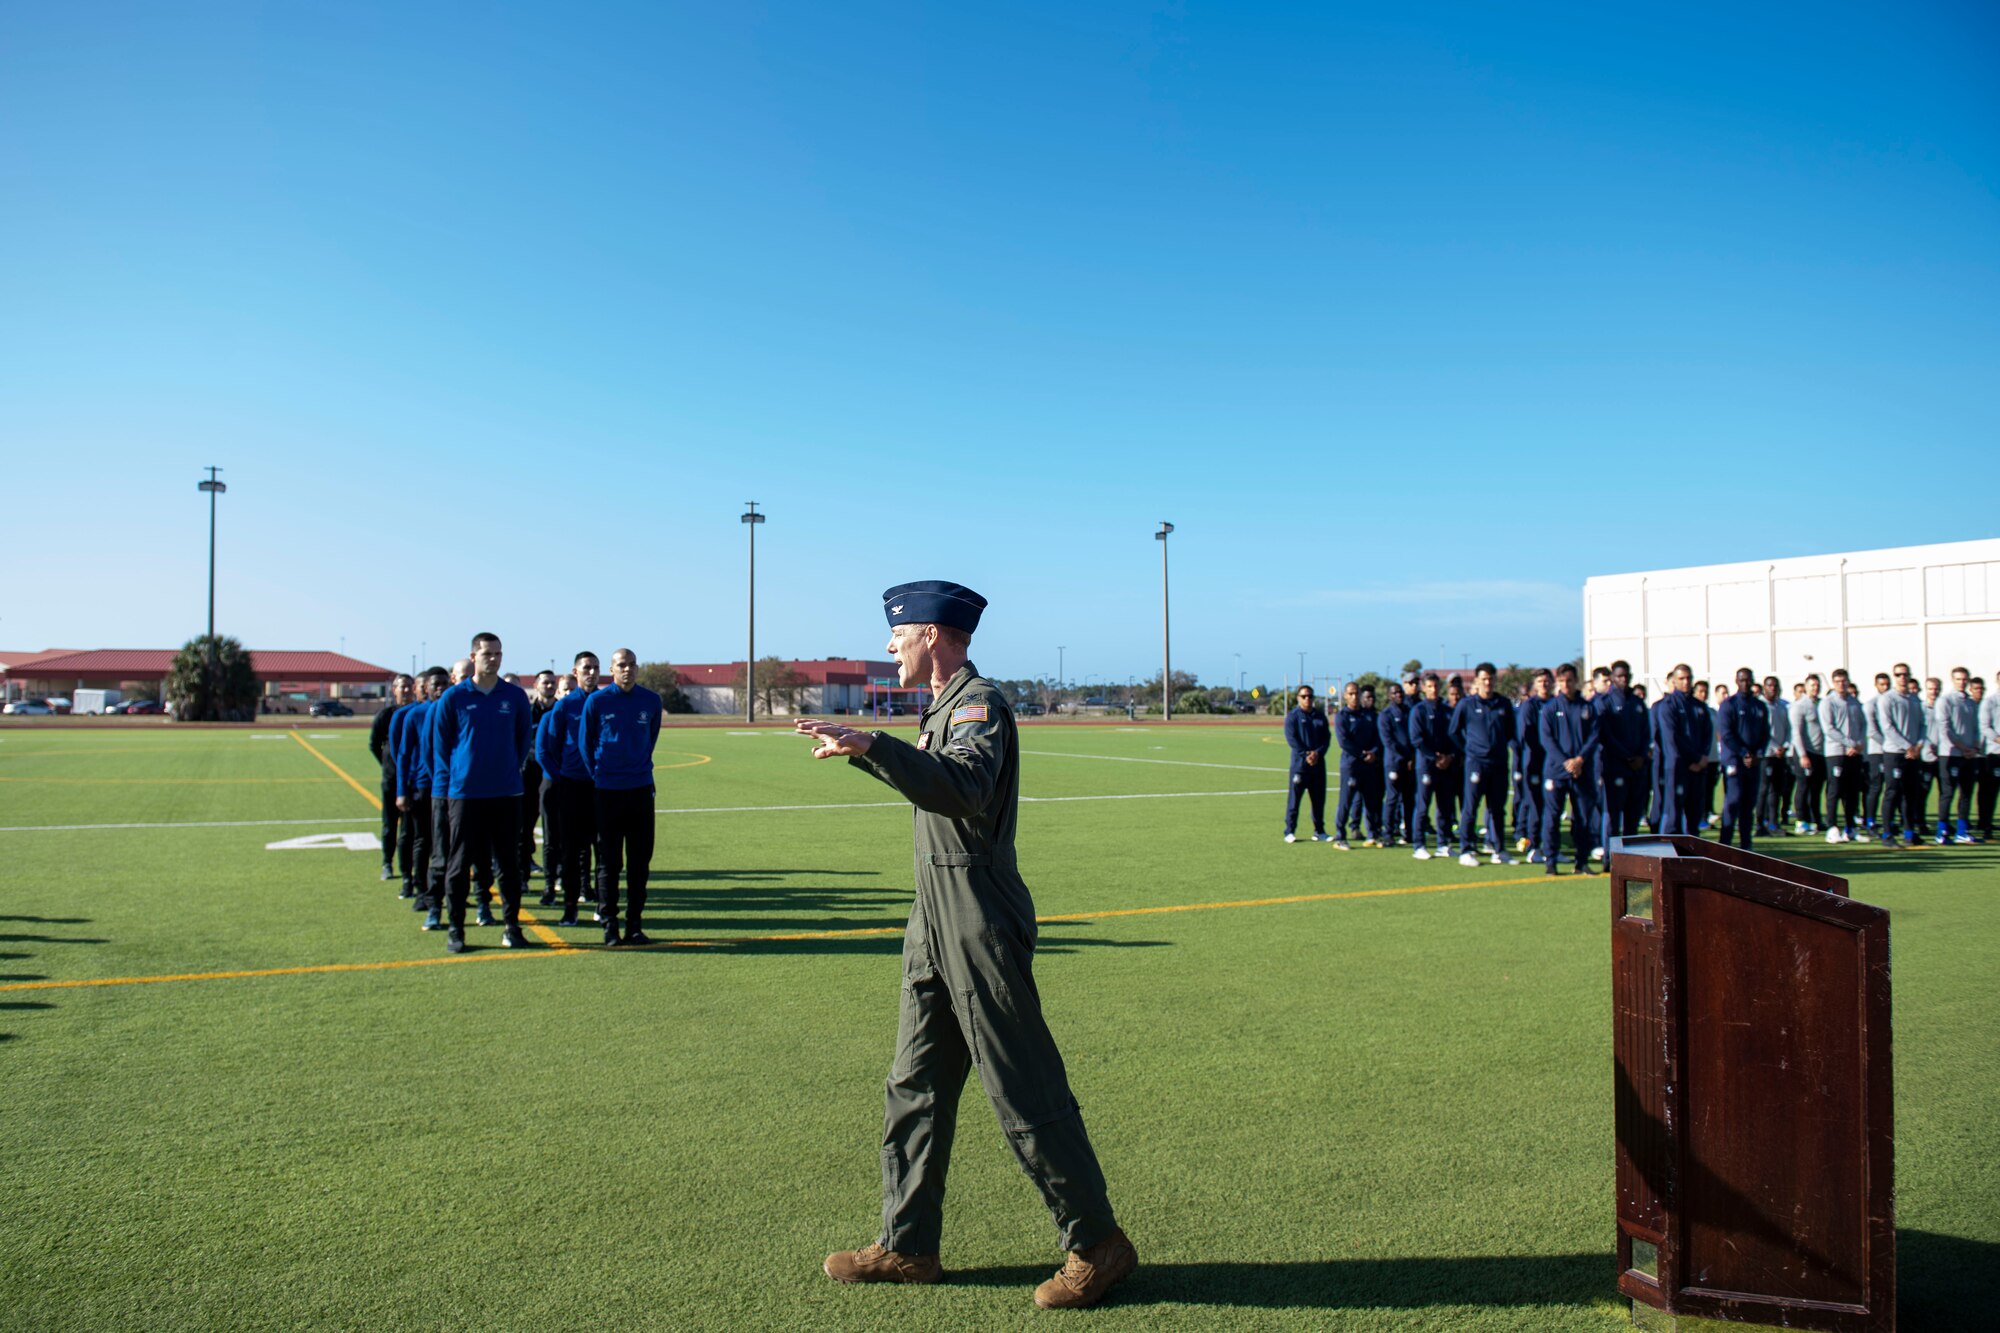 U.S. Air Force Colonel Benjamin Jonsson, 6th Air Refueling Wing commander, delivers remarks to service members participating in the Armed Forces Men’s Soccer Championship at MacDill Air Force Base, Florida, March 7, 2022.